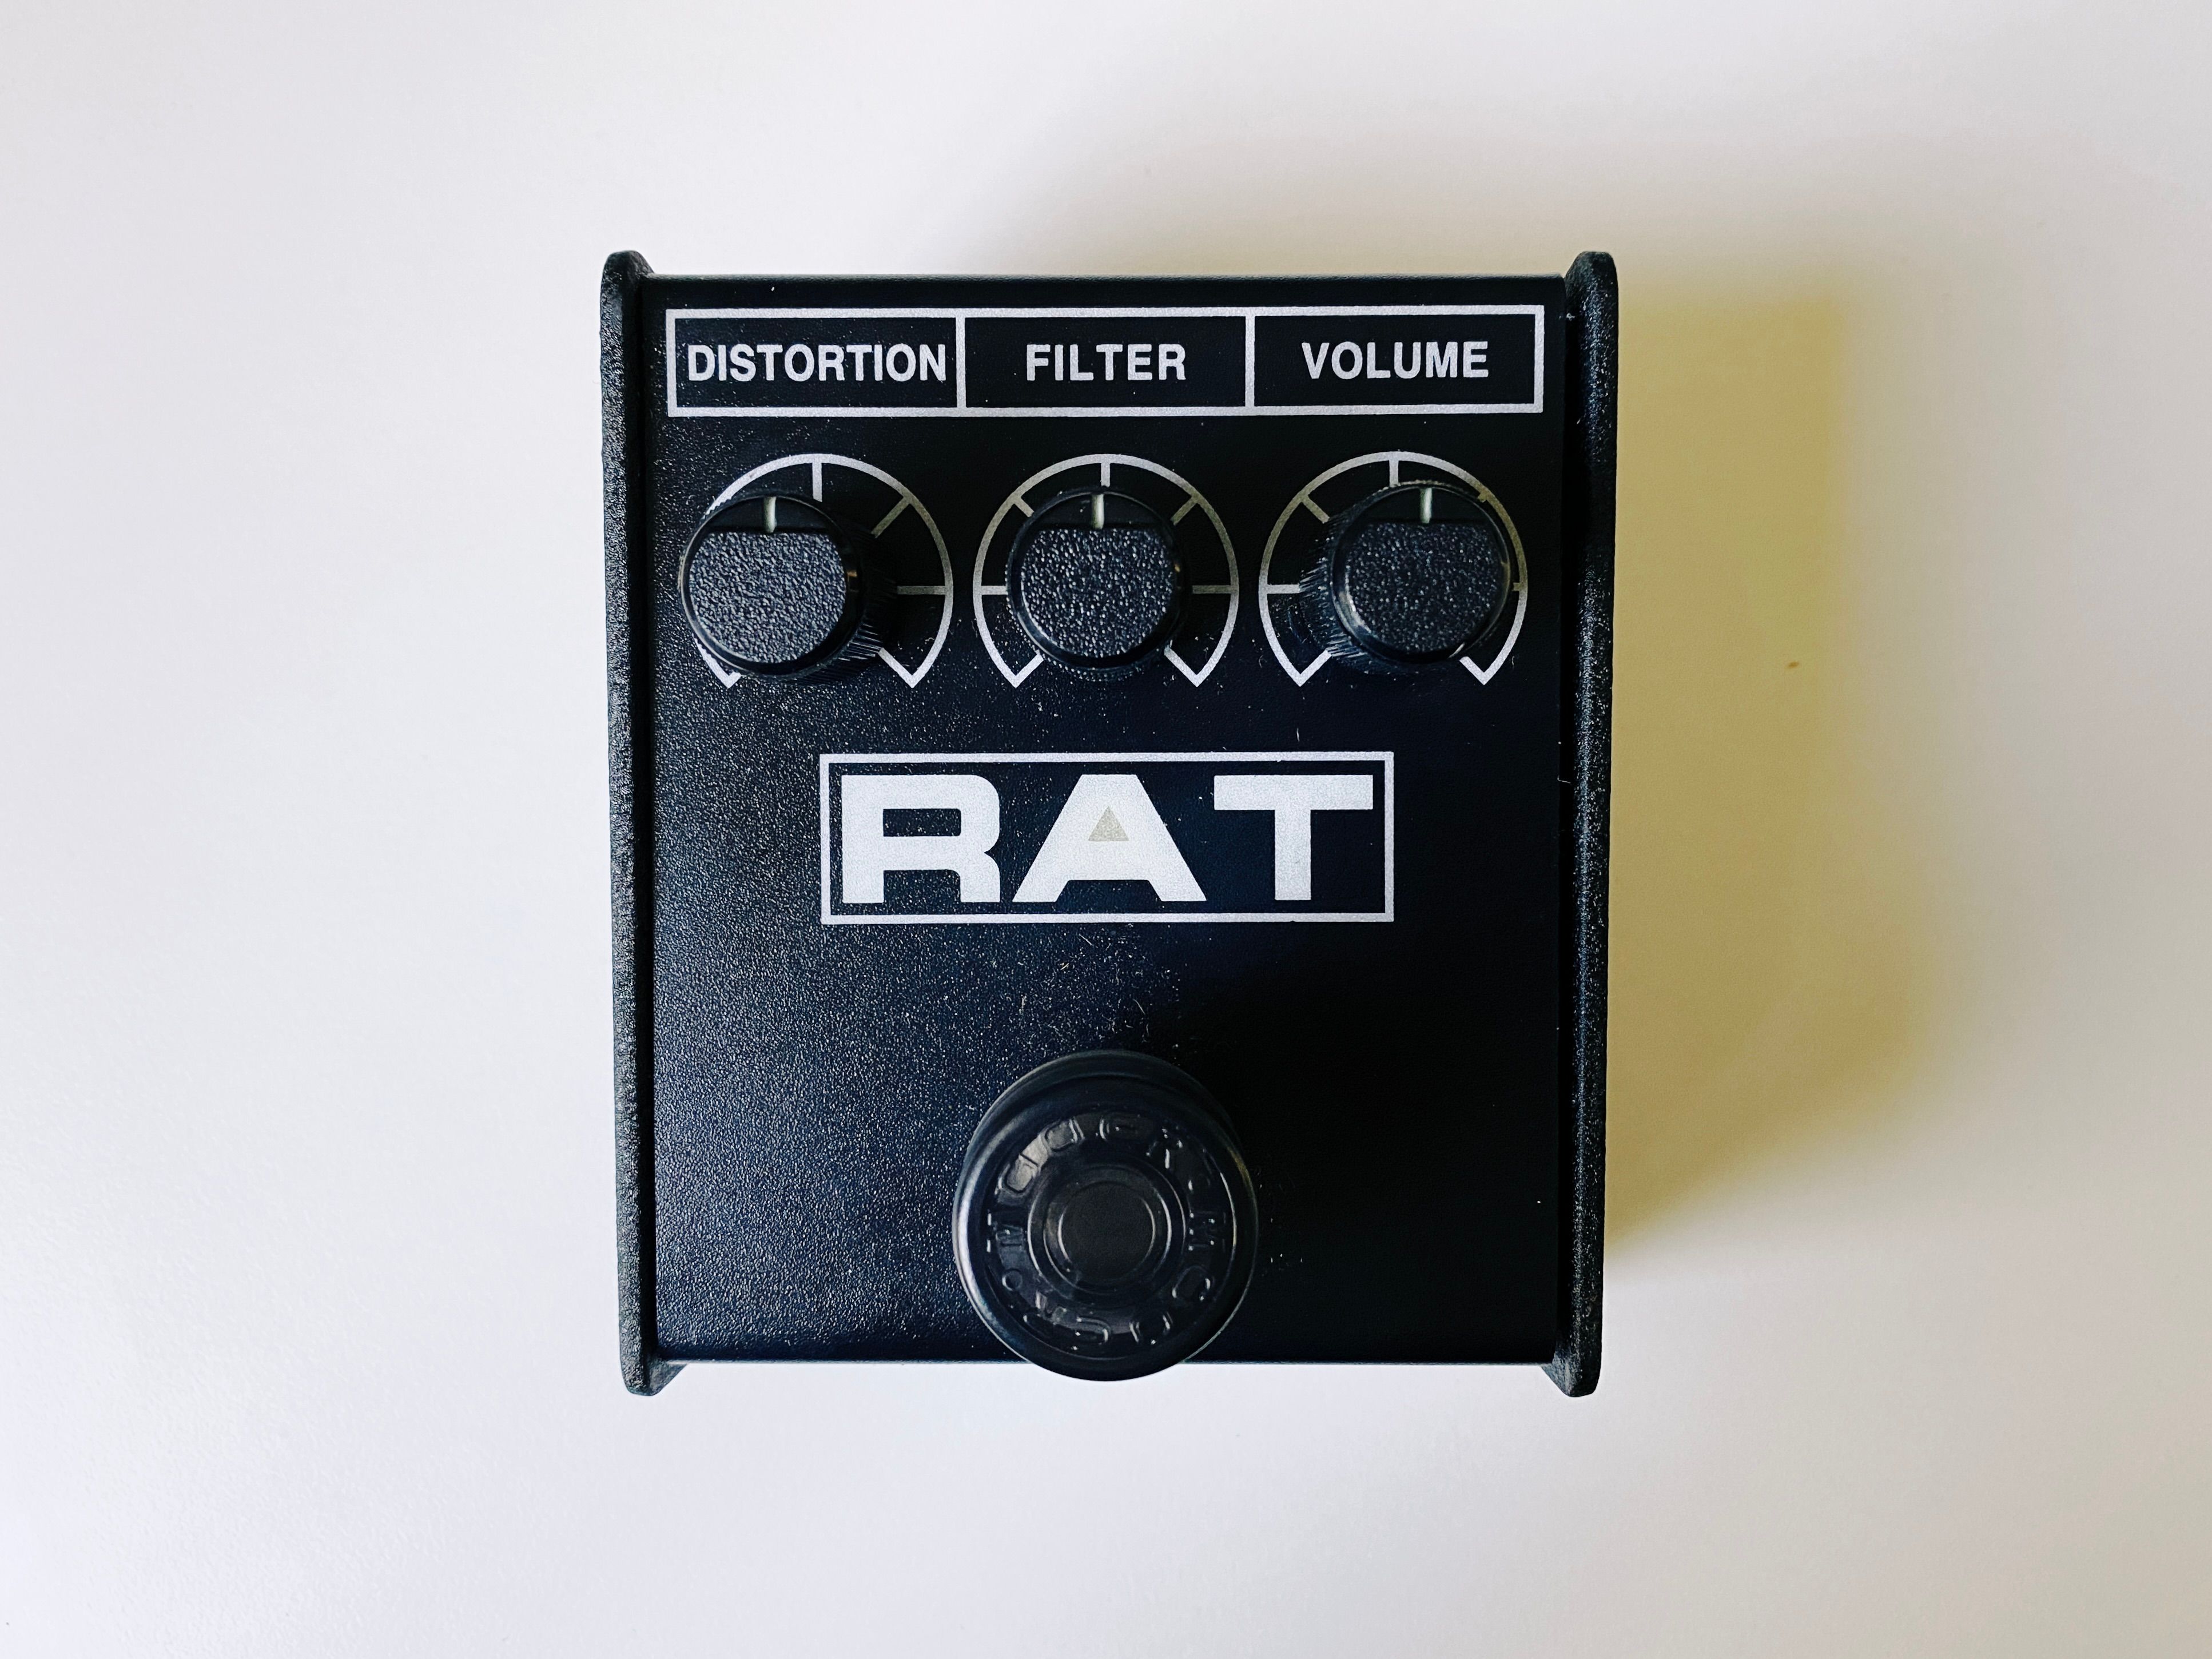 A photo of a square black guitar pedal with "RAT" written on it. There's three dials labelled Distortion, Filter, and Volume, and a clicky footswitch to turn it on and off.